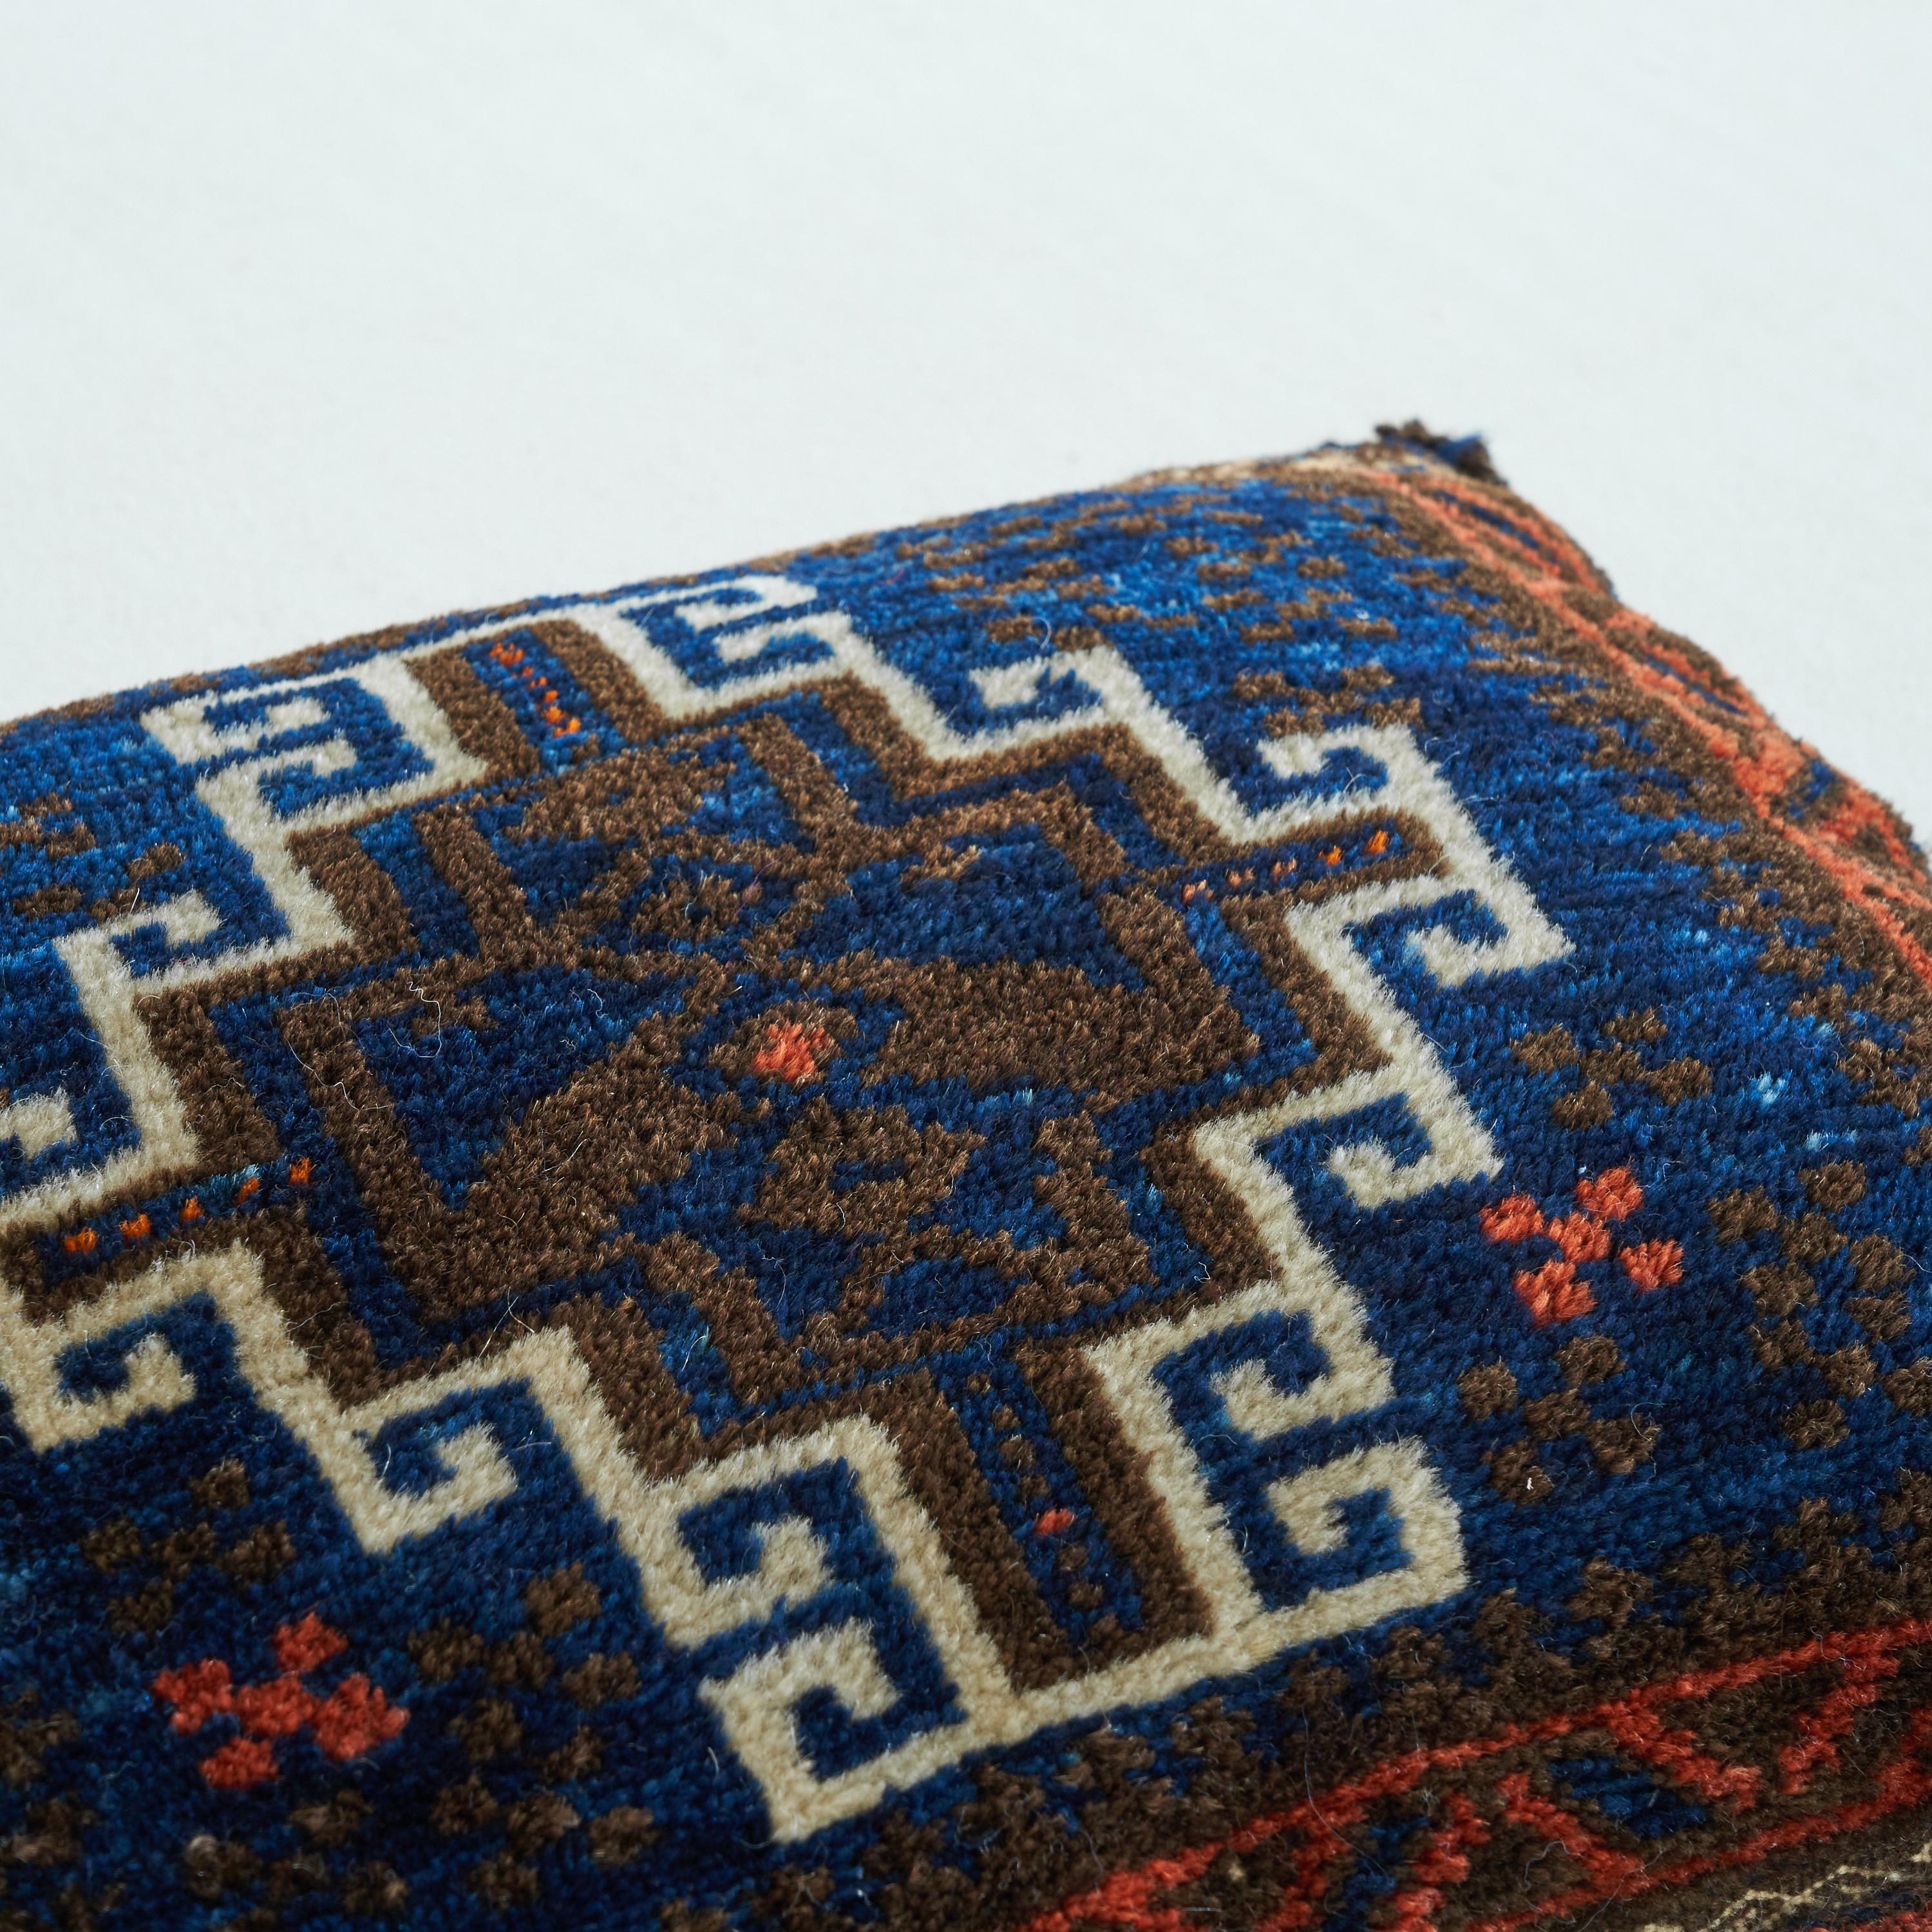 Hand Woven Persian pillow with Symmetrical Decor 1930s

Interesting small hand woven cushion from the first half of the 20th century with an interesting and distinct decor. The white ornamental lines are very elegant and the other red and blue